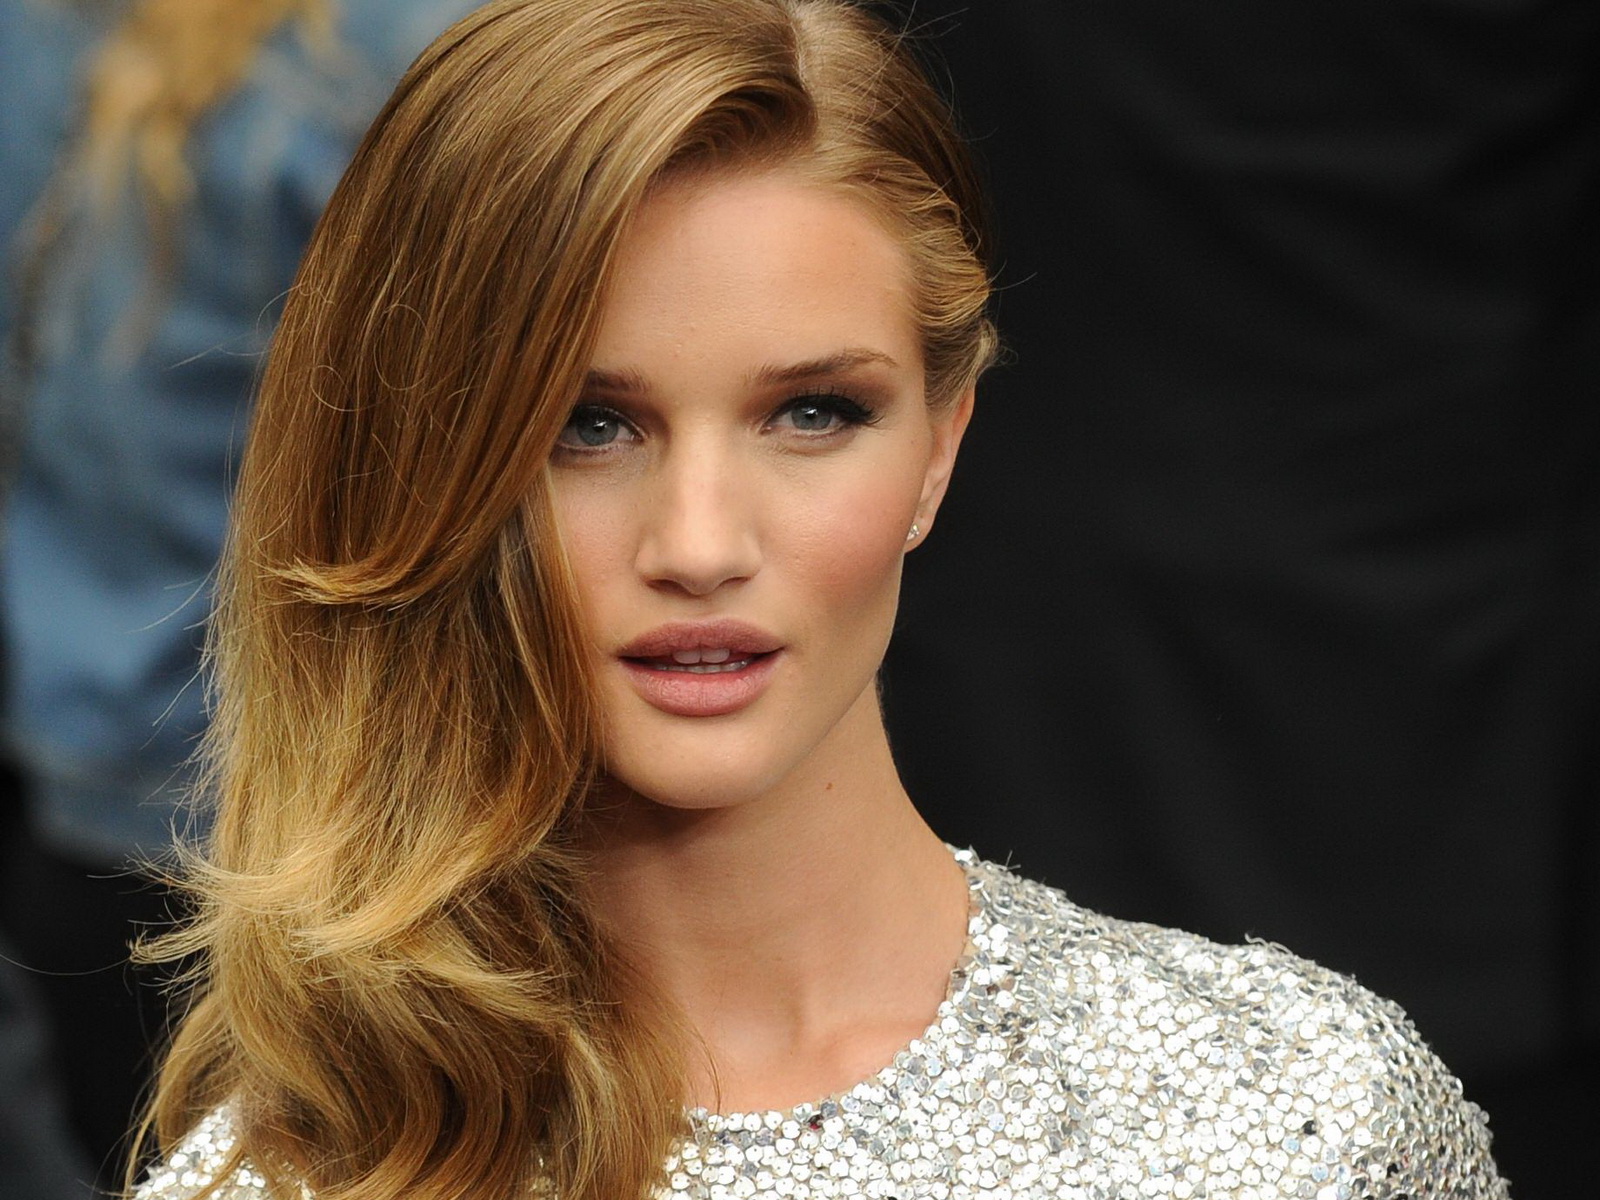 Rosie Huntington | HD Wallpapers (High Definition) | Free ...